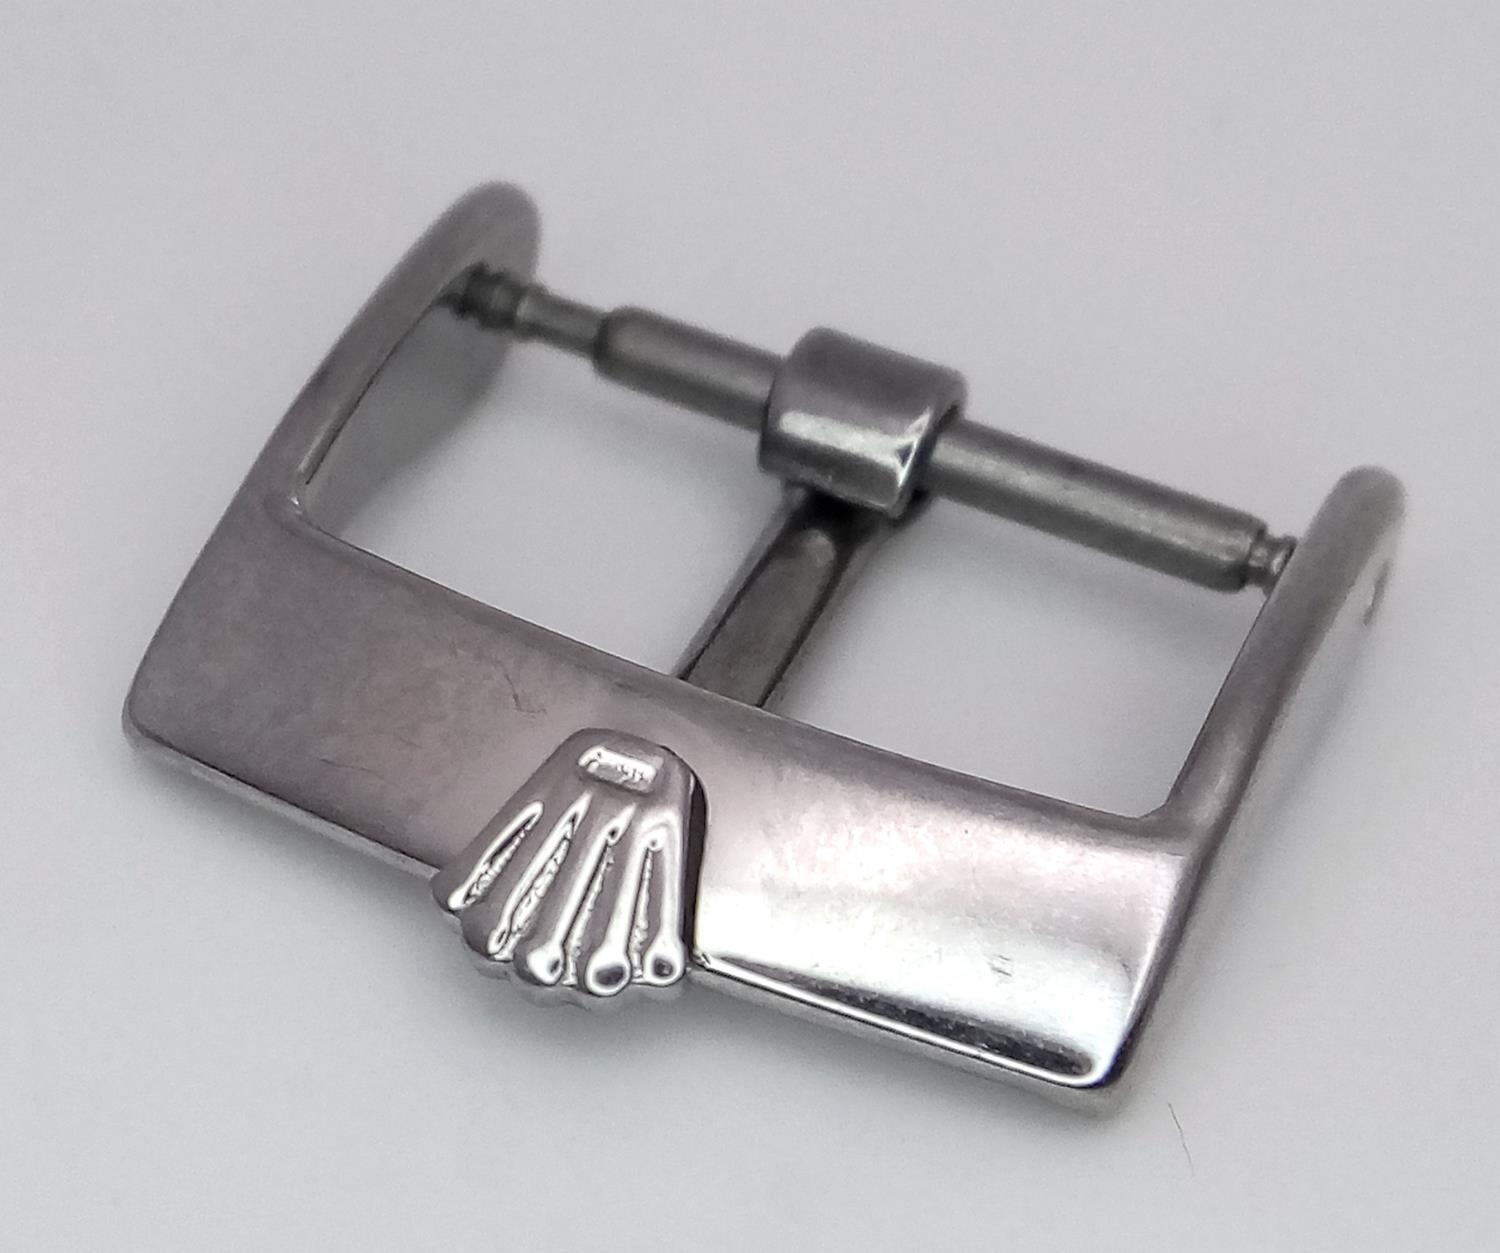 A Rolex Branded Watch Strap Buckle. - Image 2 of 4